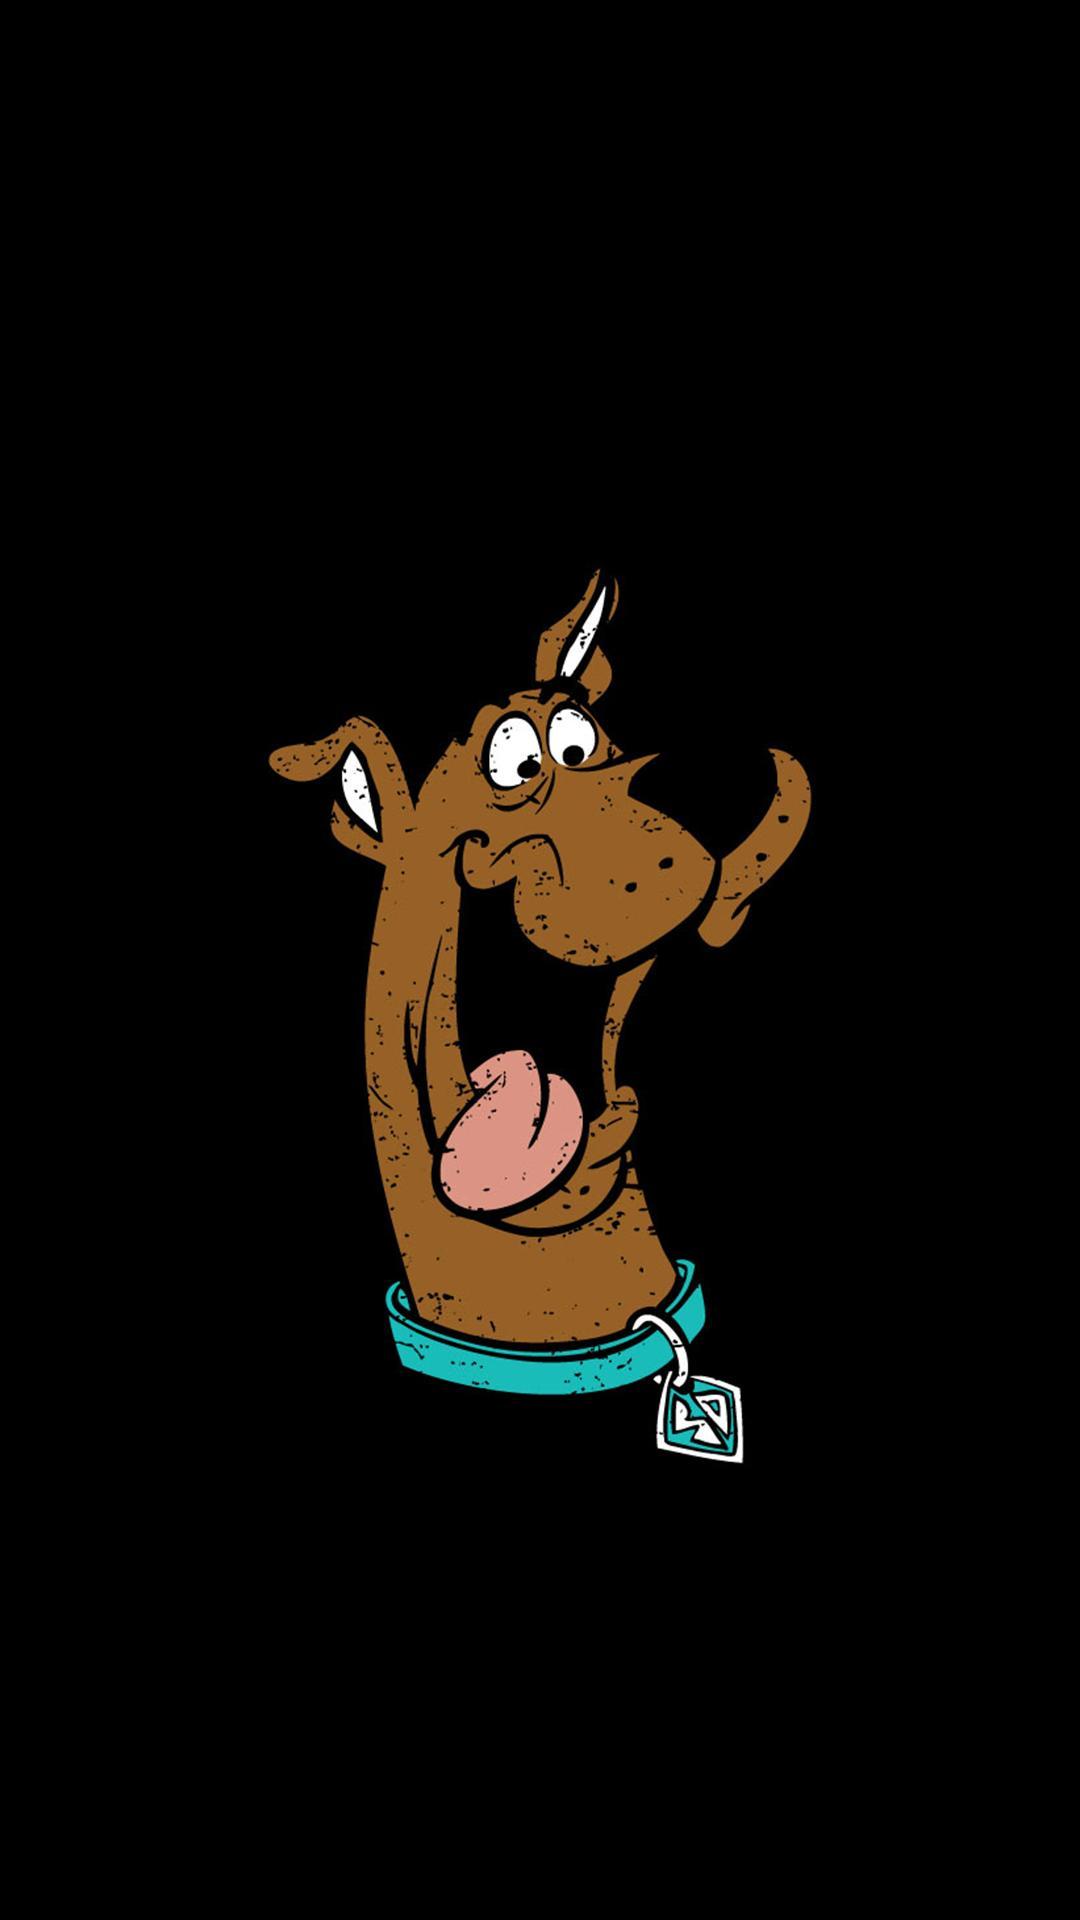 Scooby Doo HD Wallpaper for Android